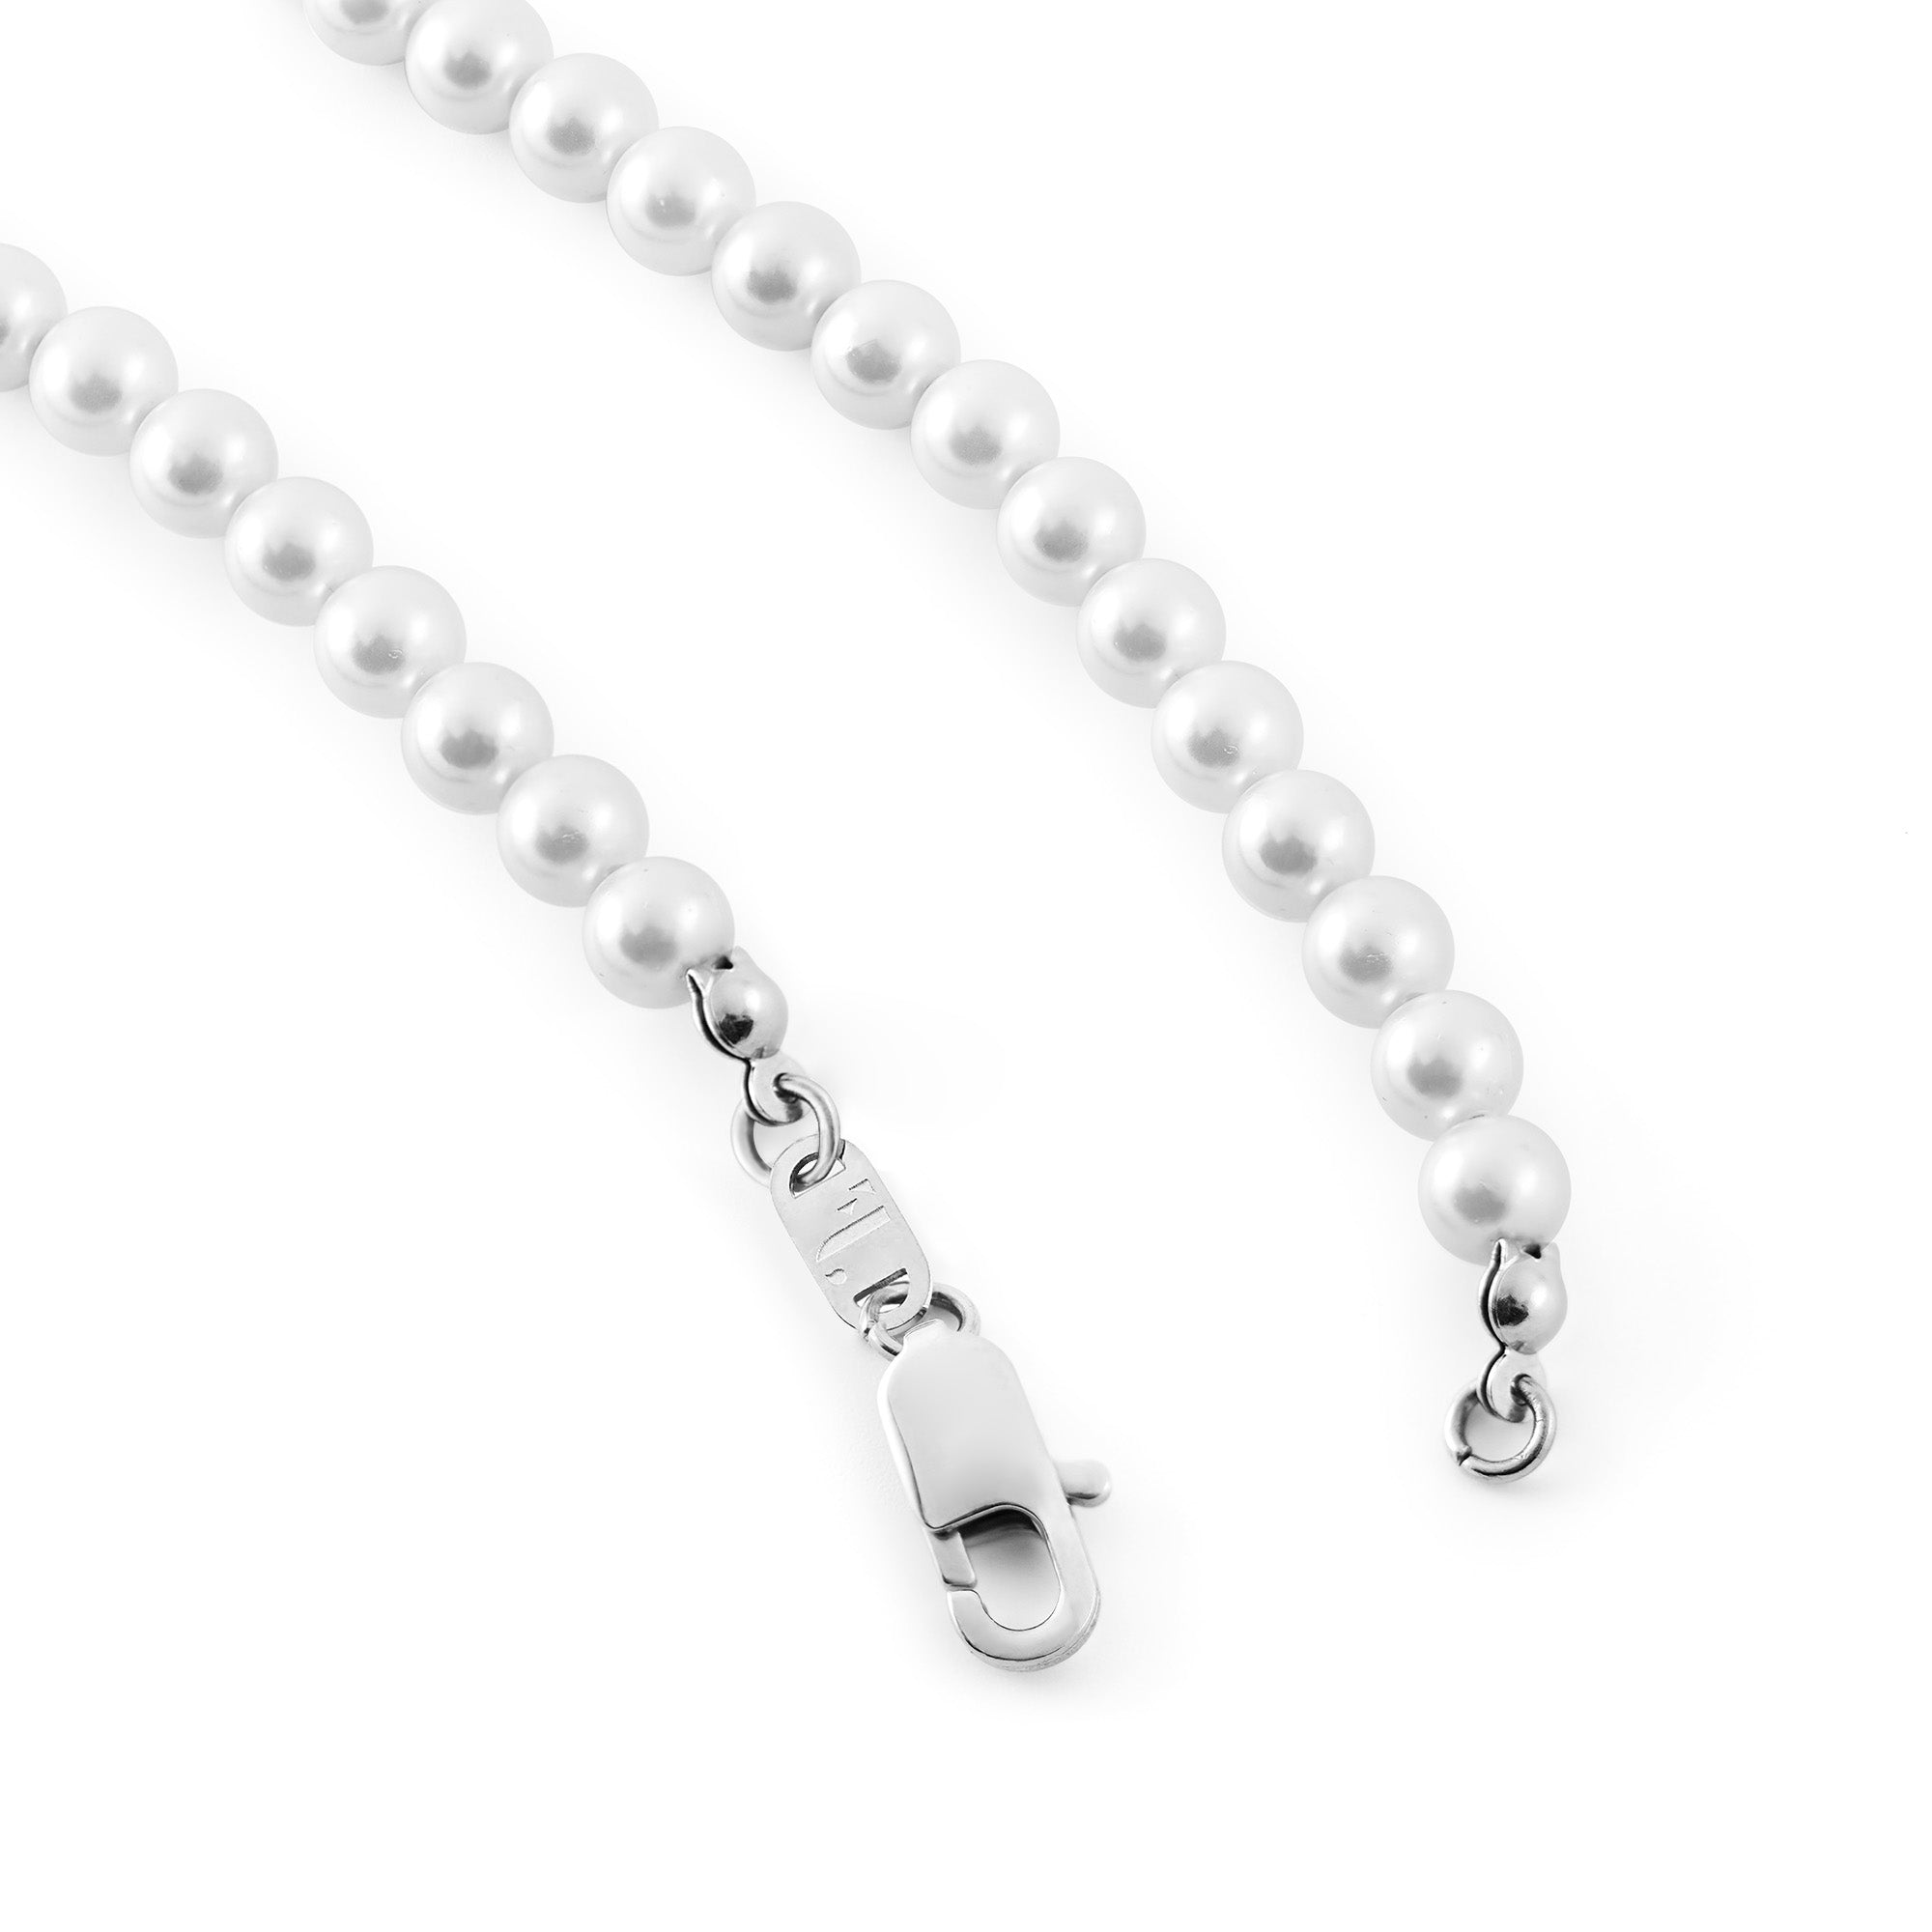 Var women's necklace by Five Jwlry, designed with white glass pearls complemented by a silver stainless steel buckle. Available in sizes 45cm and 50cm. Crafted from water-resistant 316L stainless steel. Hypoallergenic with a 2-year warranty.